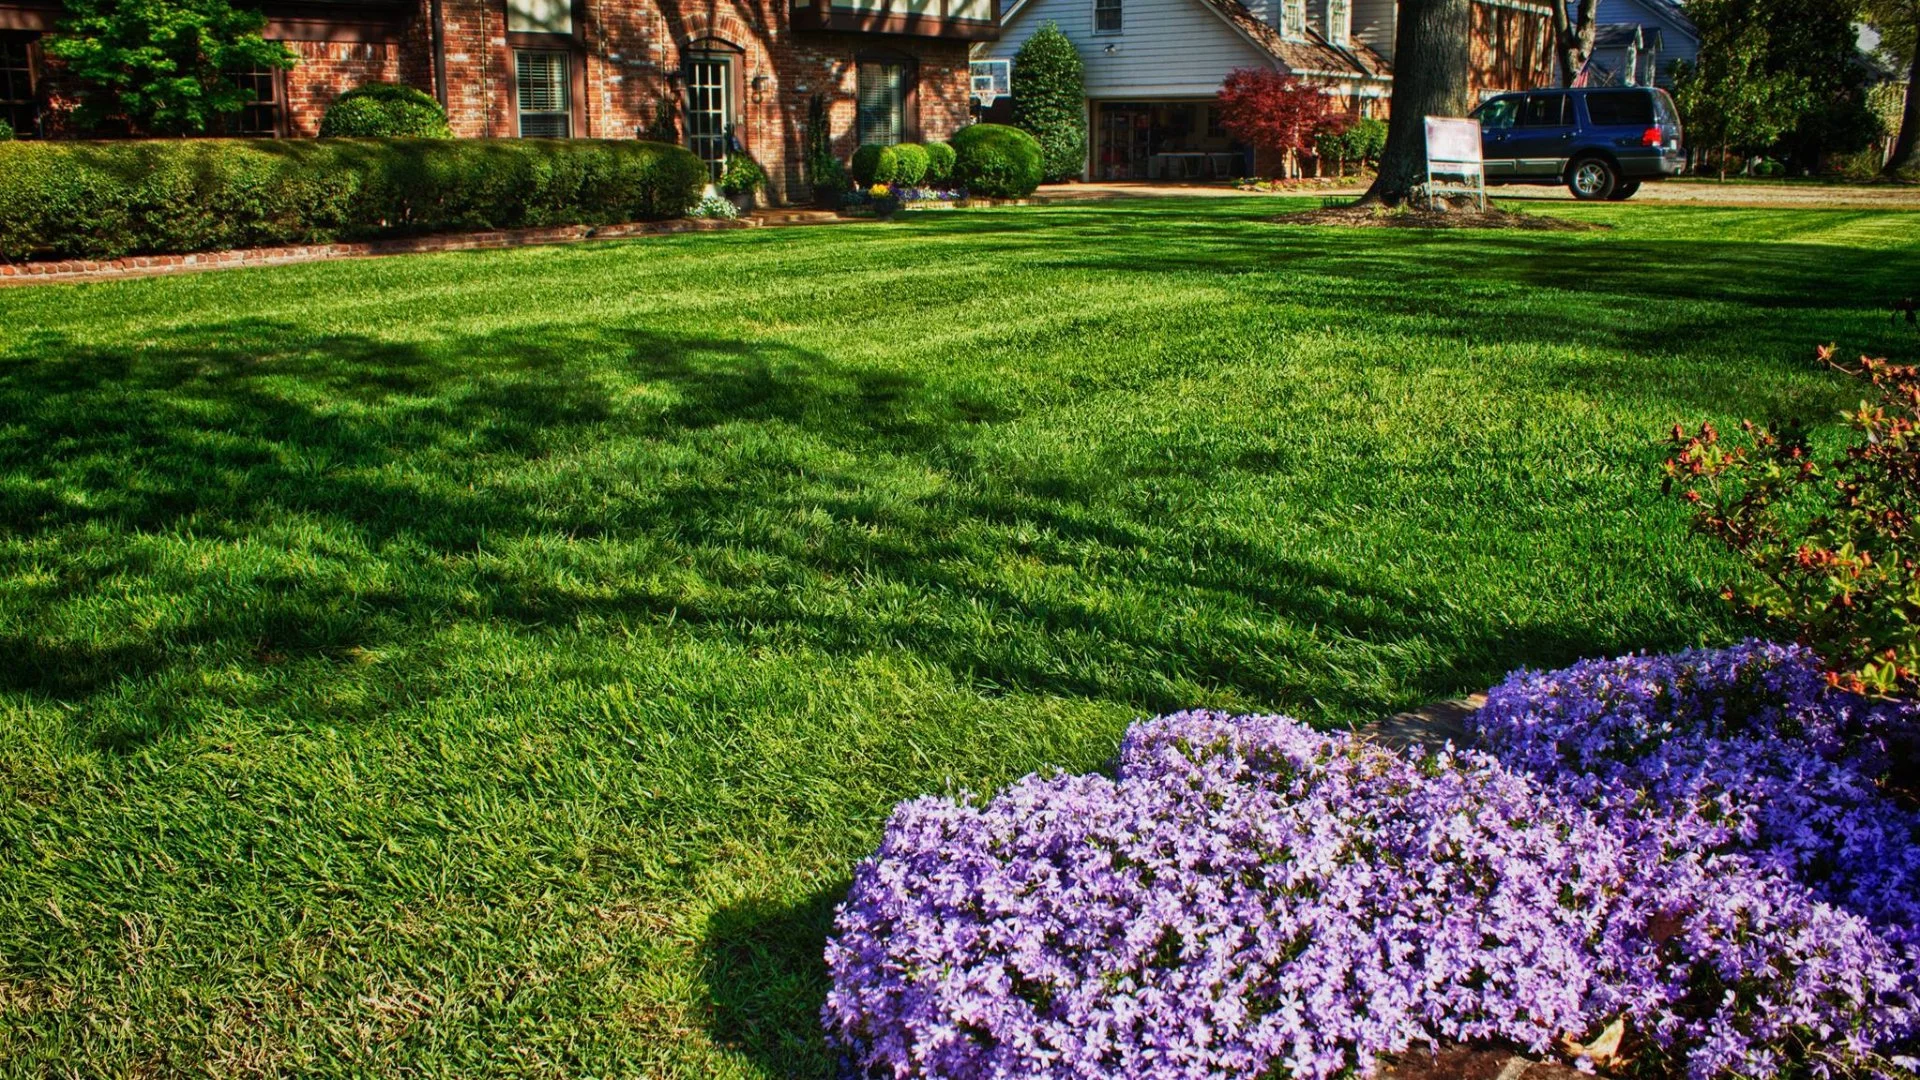 Spring Fertilization: Is It Really Necessary for a Healthy Lawn?